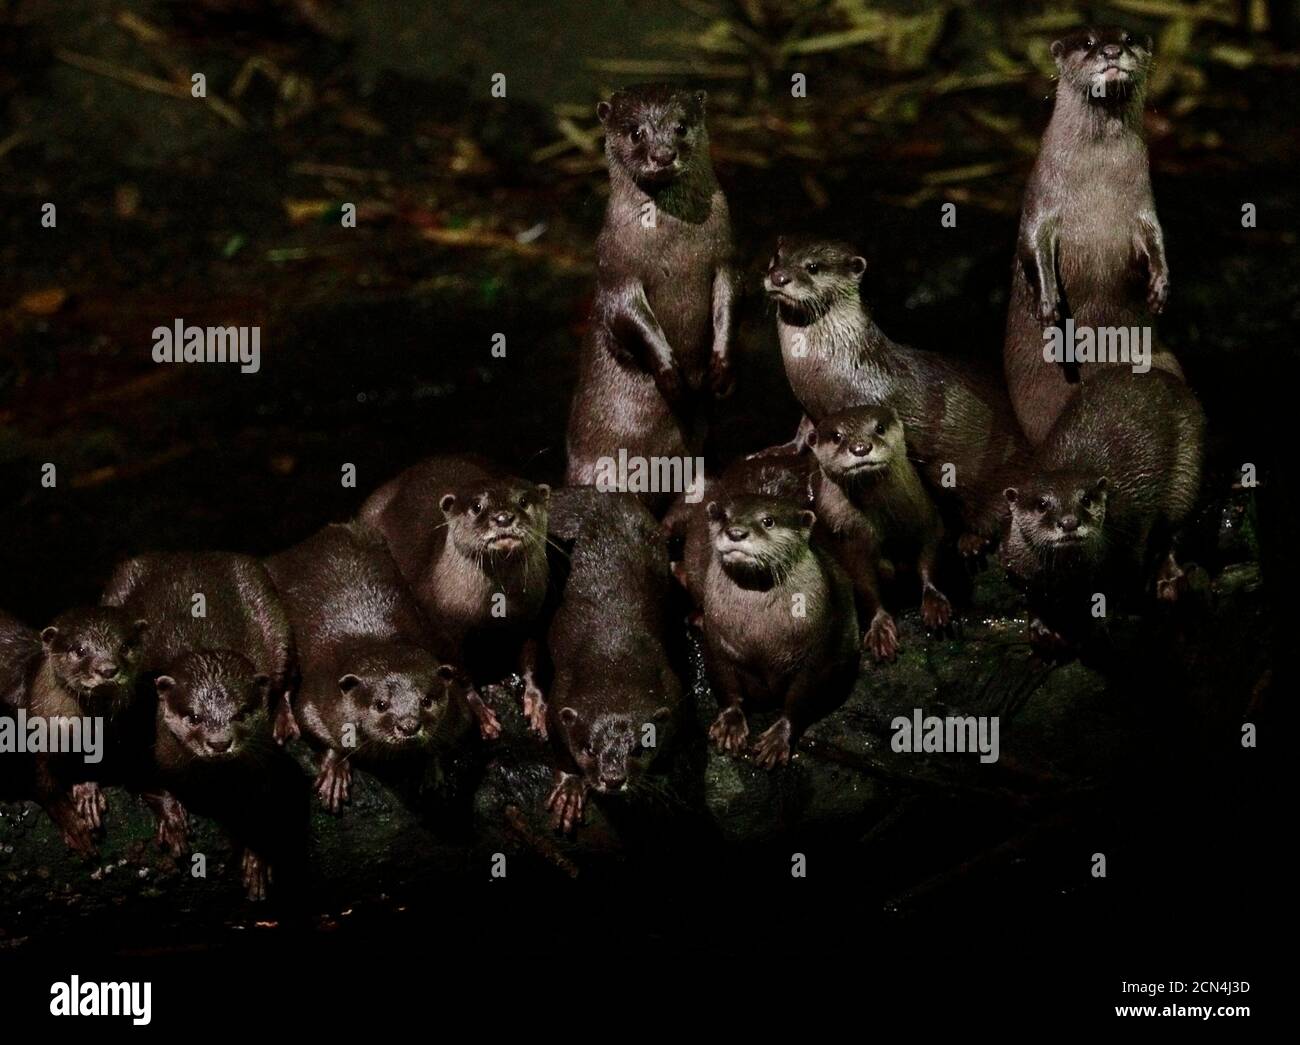 A romp of Asian small-clawed otters (Aonyx cinerea) gather near a stream in their enclosure at the Night Safari in Singapore March 7, 2012. The smallest of the world's otter species are classed as being vulnerable in the wild, according to  the International Union for Conservation of Nature (IUCN) Red List. REUTERS/Tim Chong (SINGAPORE - Tags: ANIMALS) Stock Photo